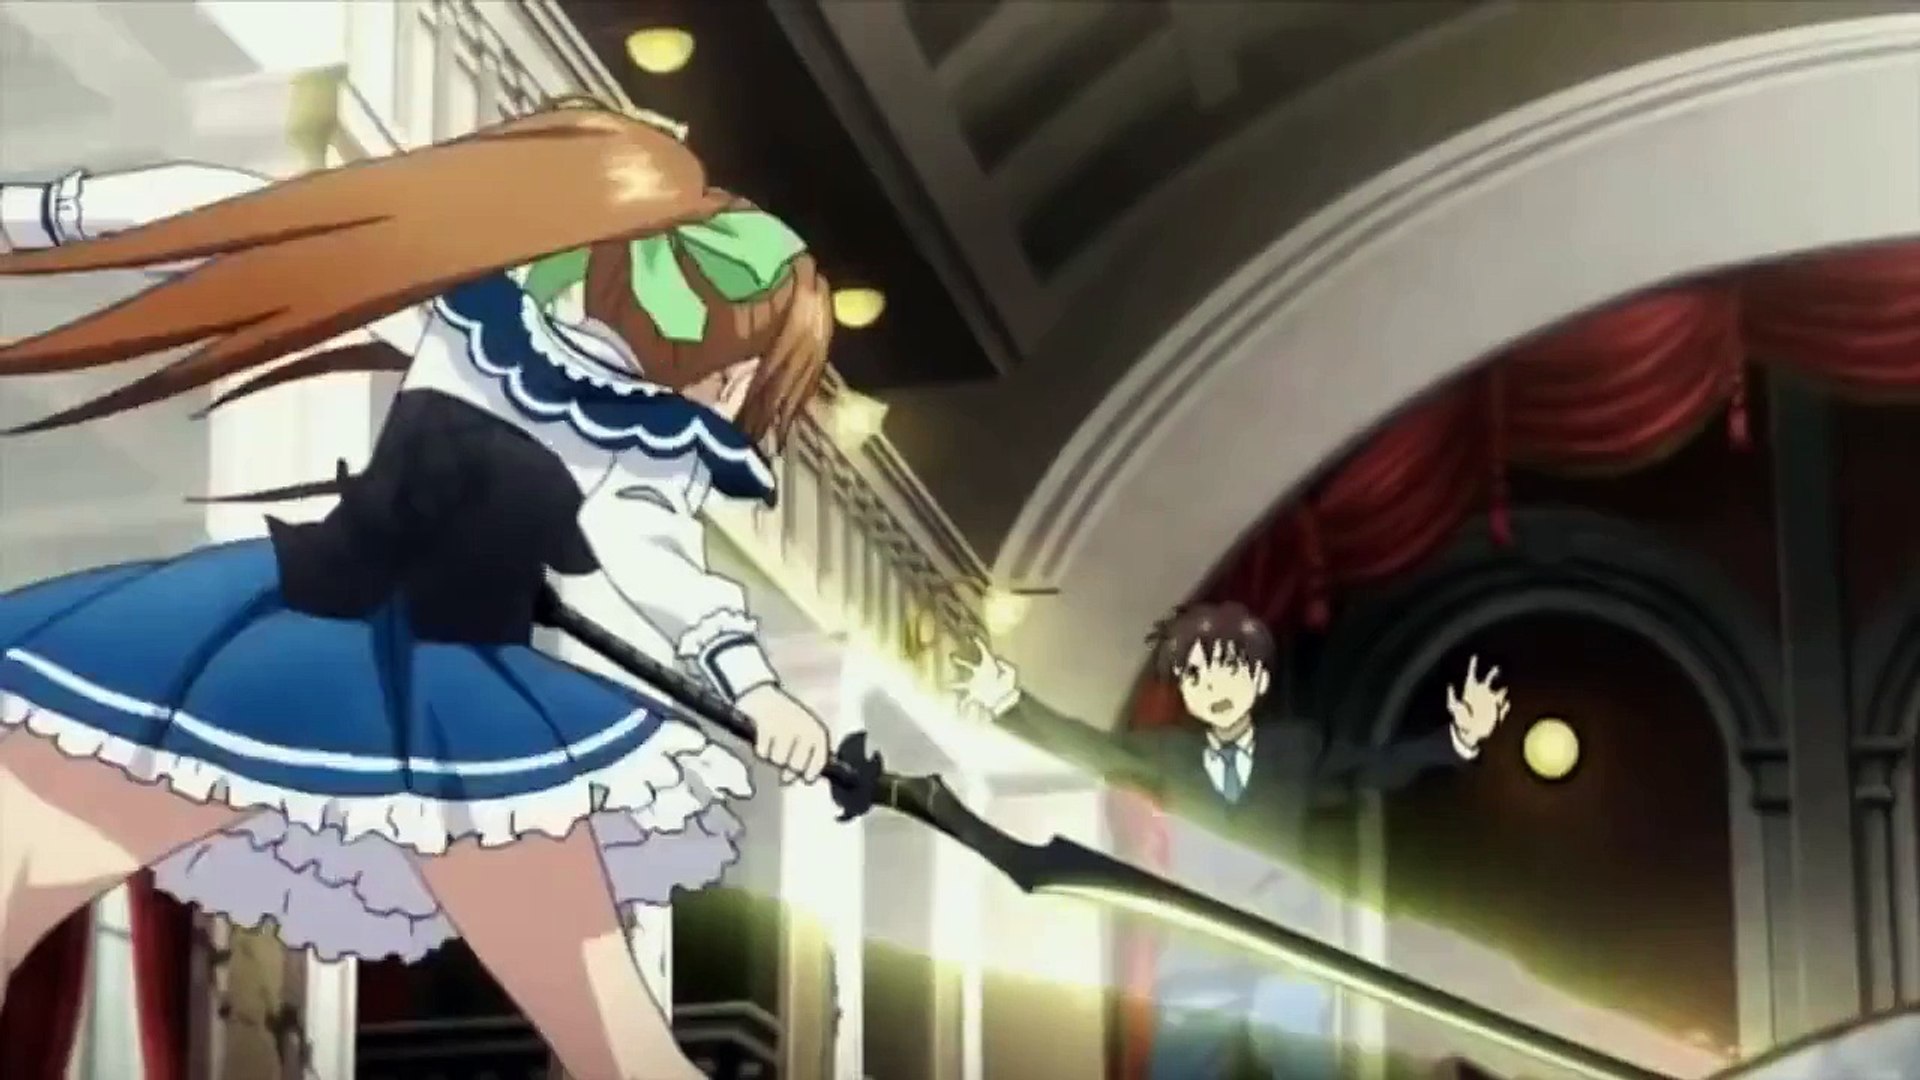 Top 10 Harem Anime Where The Mc Is An Overpowered Transfer Student - video  Dailymotion